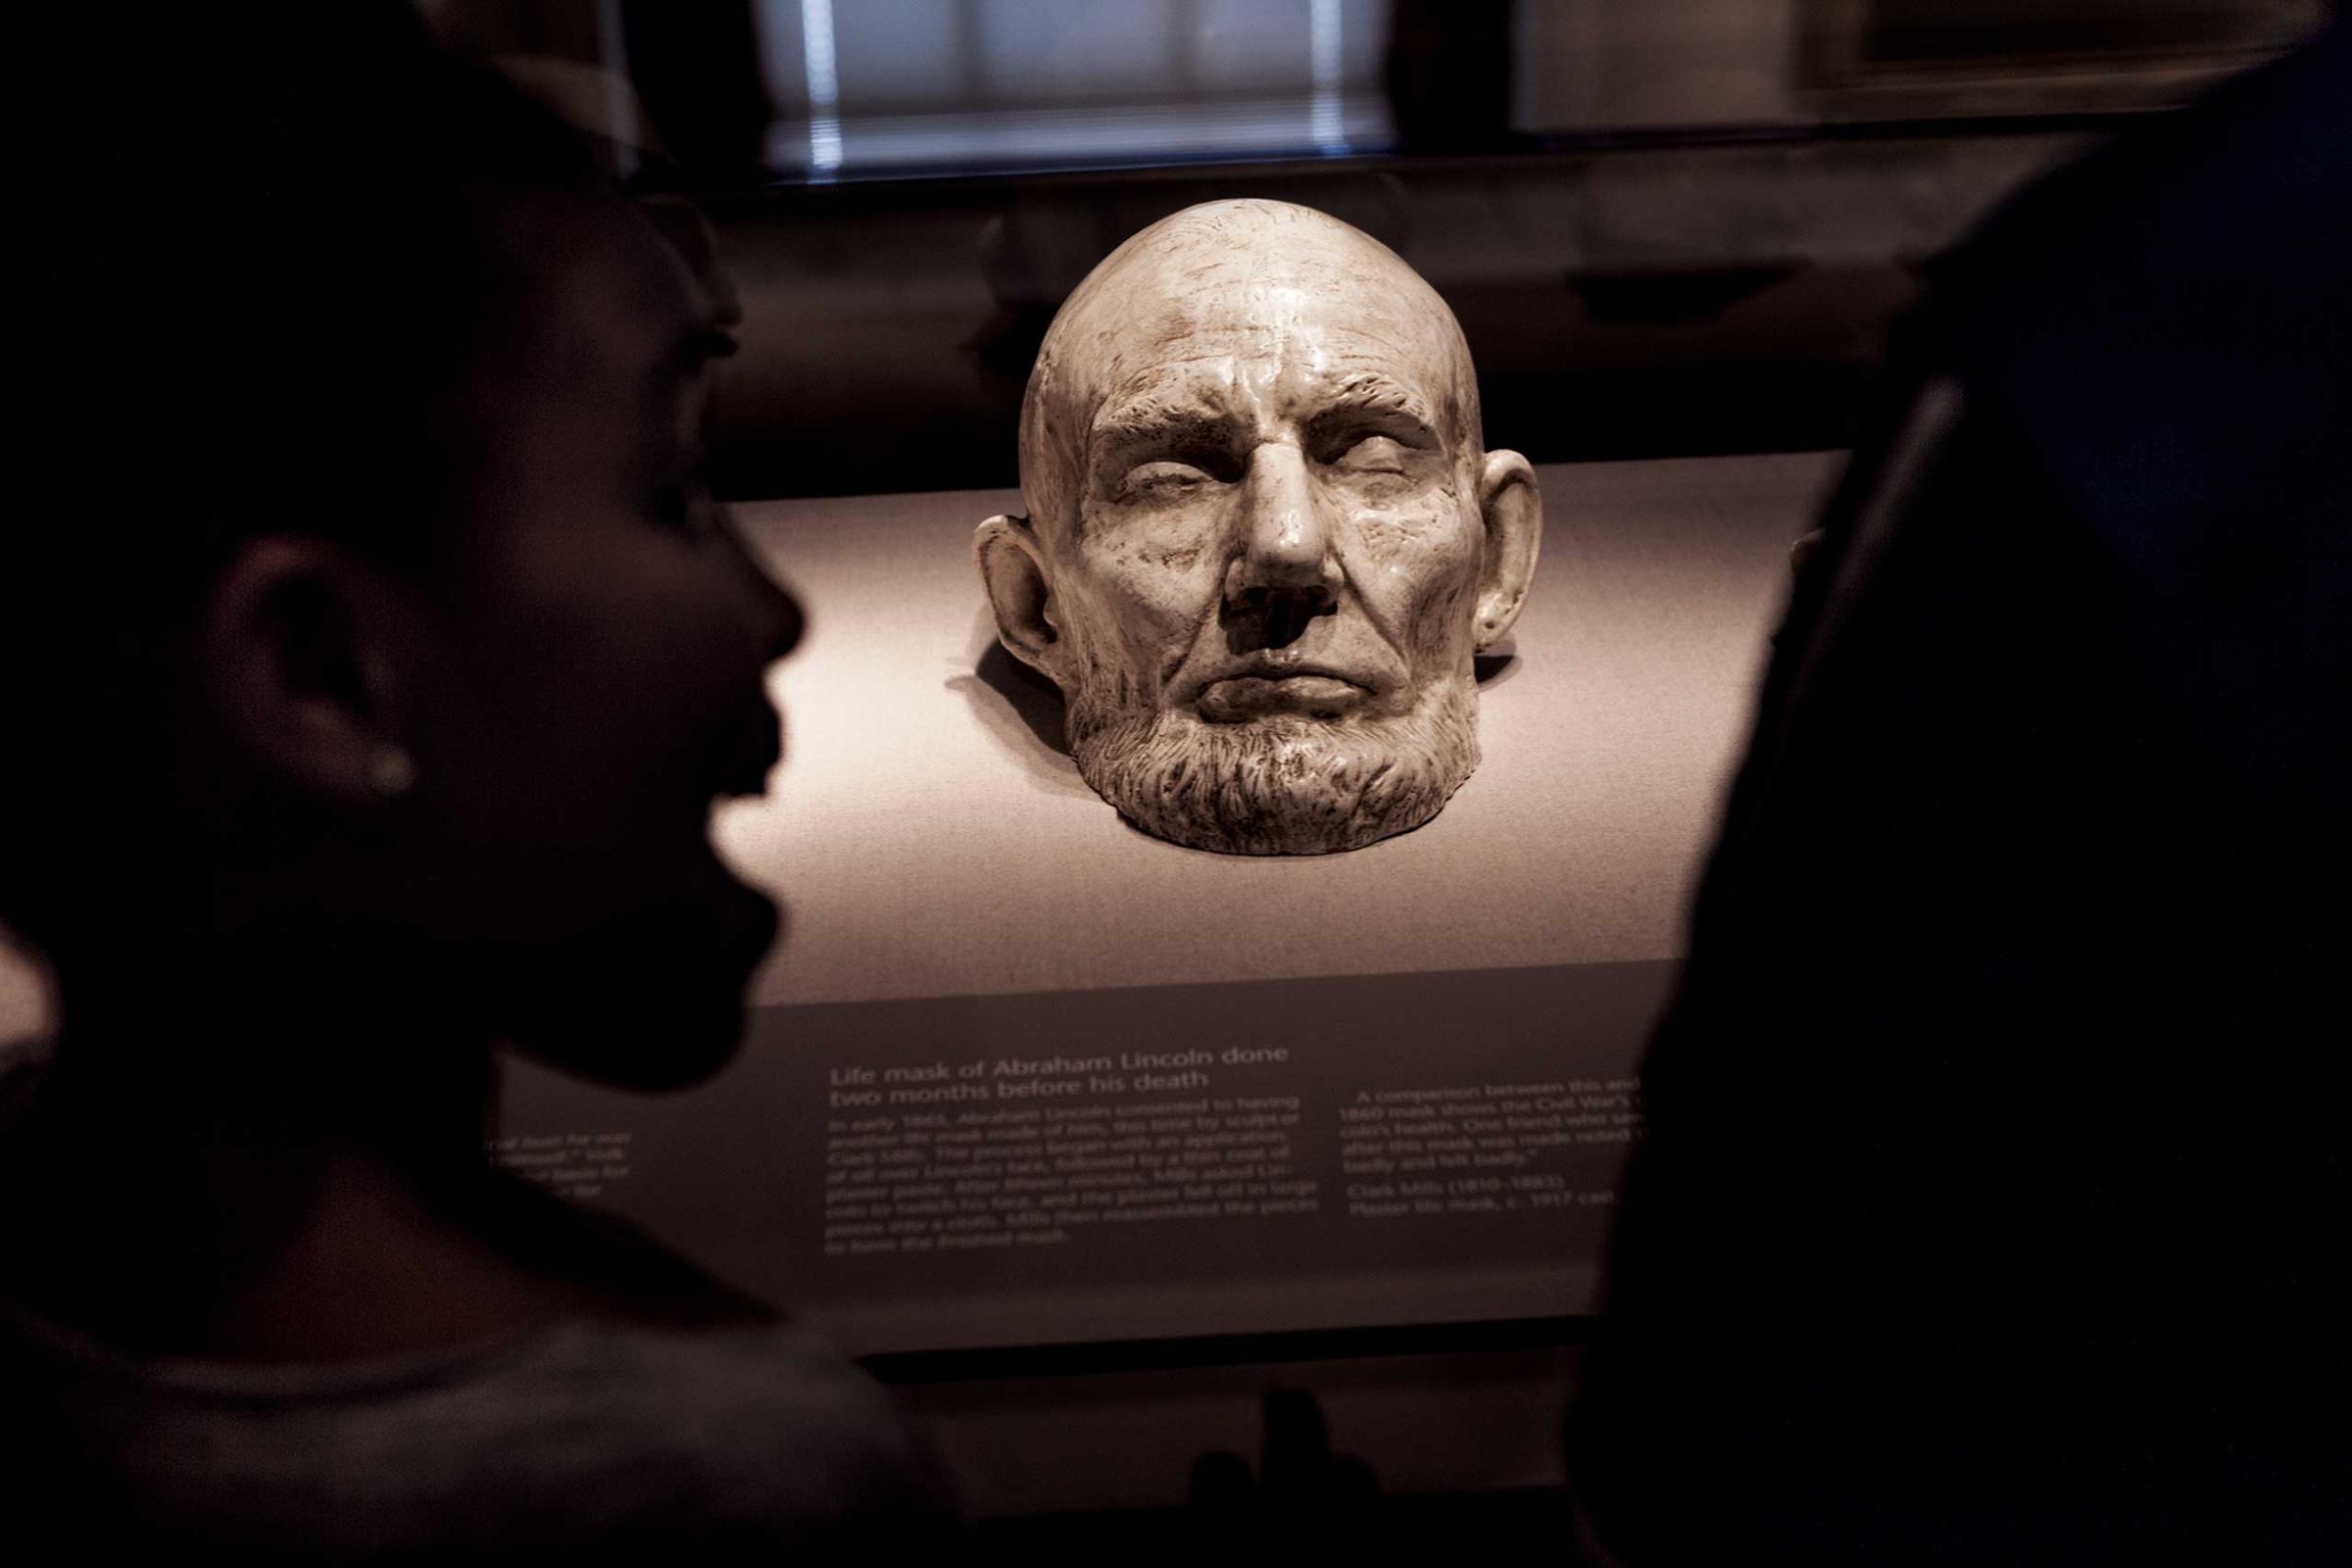 From the April issue of National Geographic magazine: Lincoln Children in Washington, D.C., view a plaster cast of a life mask of Lincoln’s face, made nine weeks before his death in April 1865.